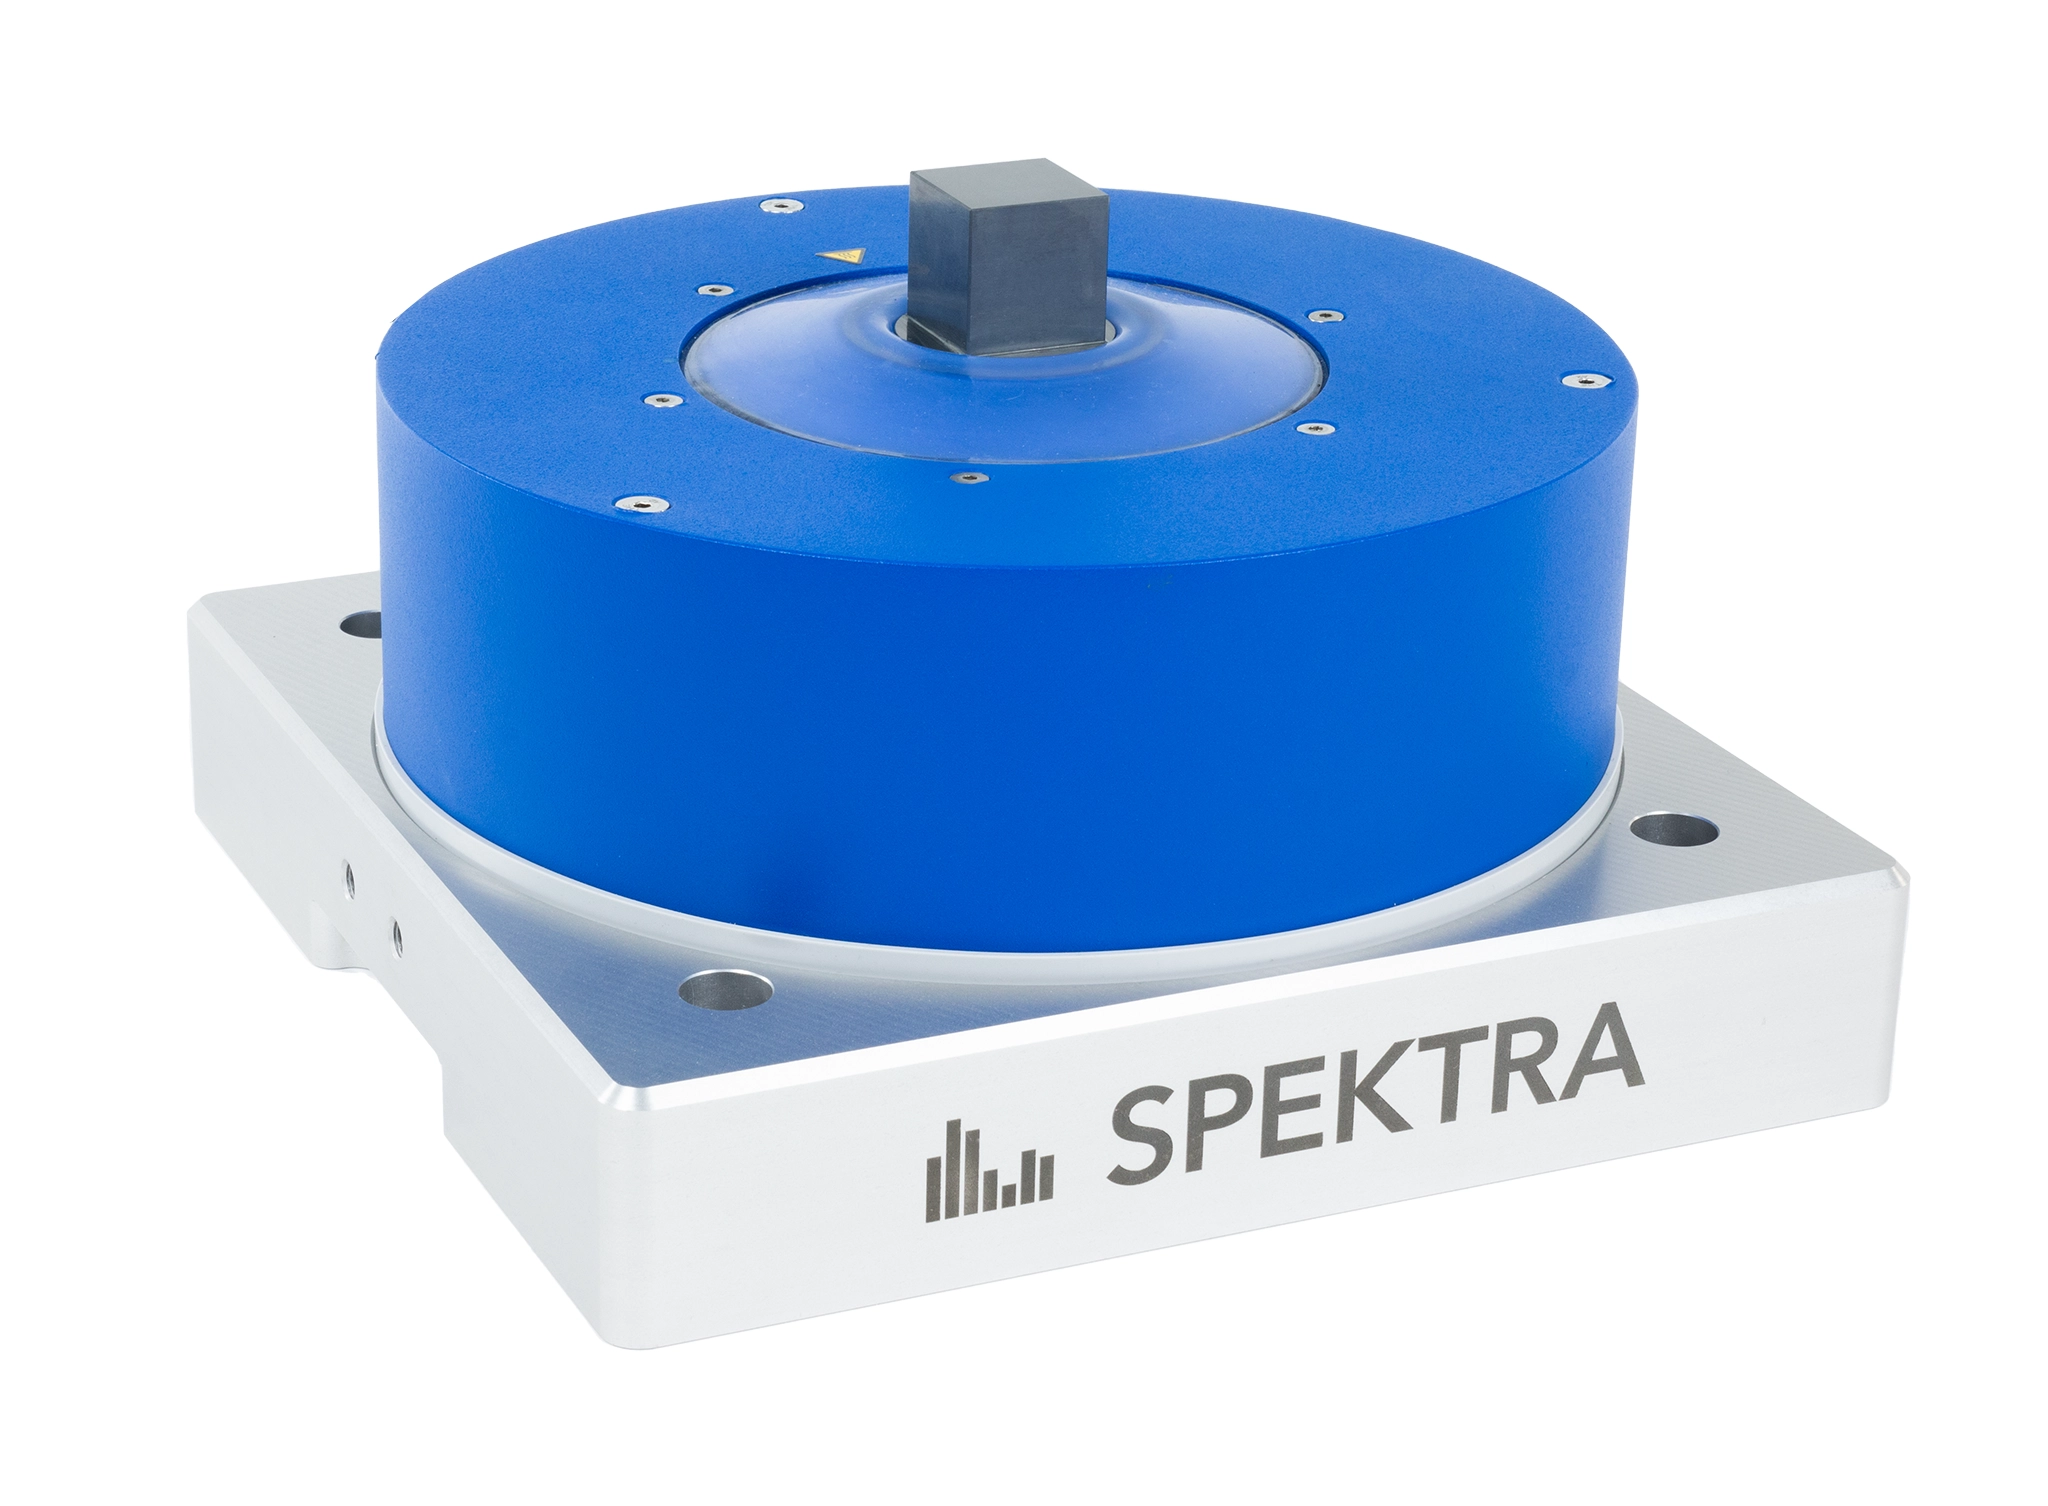 Vibration exciter type SE-21 from SPEKTRA View from top left